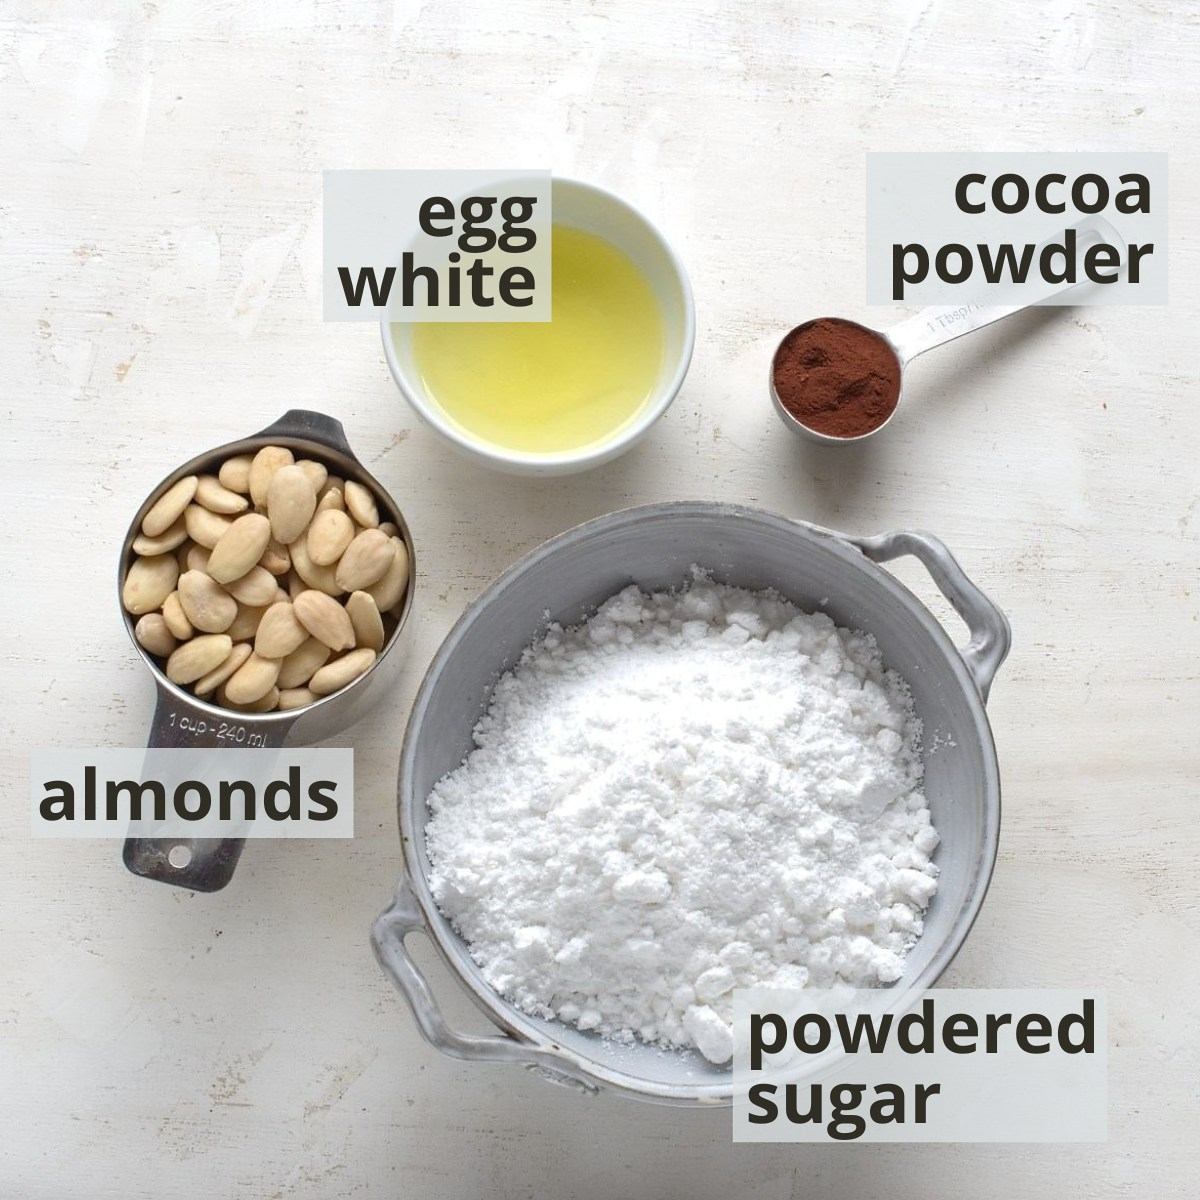 Ingredients to make marzipan dough, with captions.